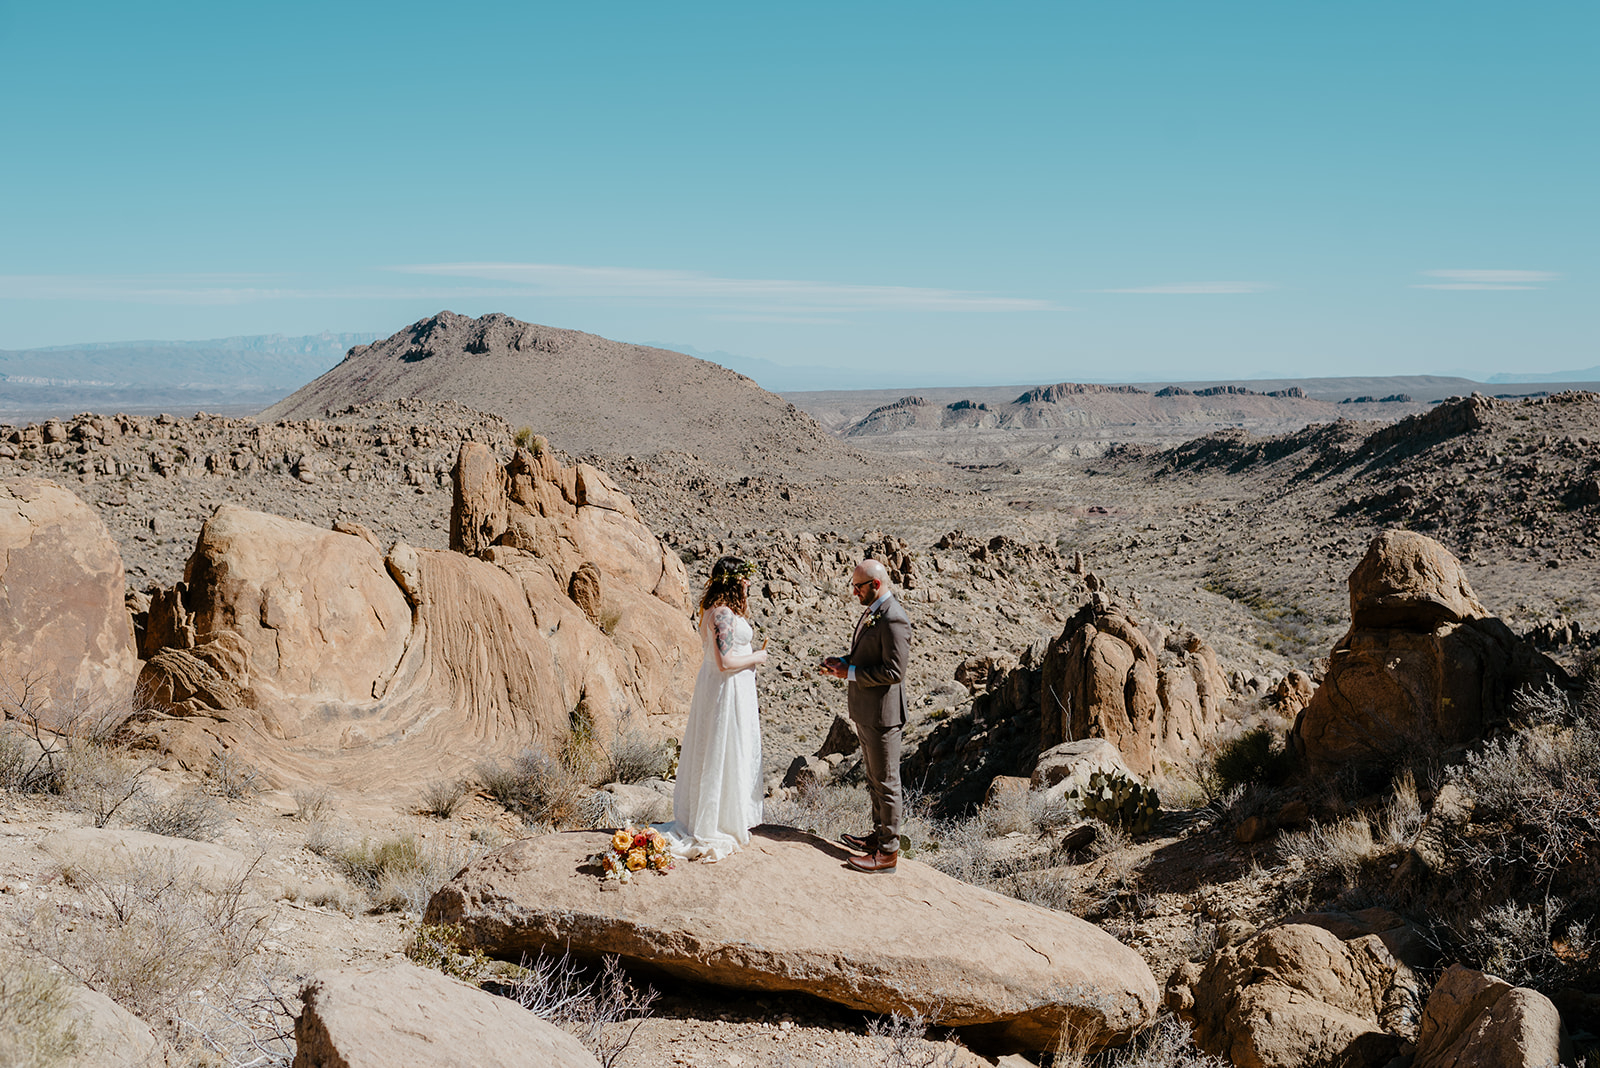 A couple who eloped at Big Bend National Park say their vows near the summit